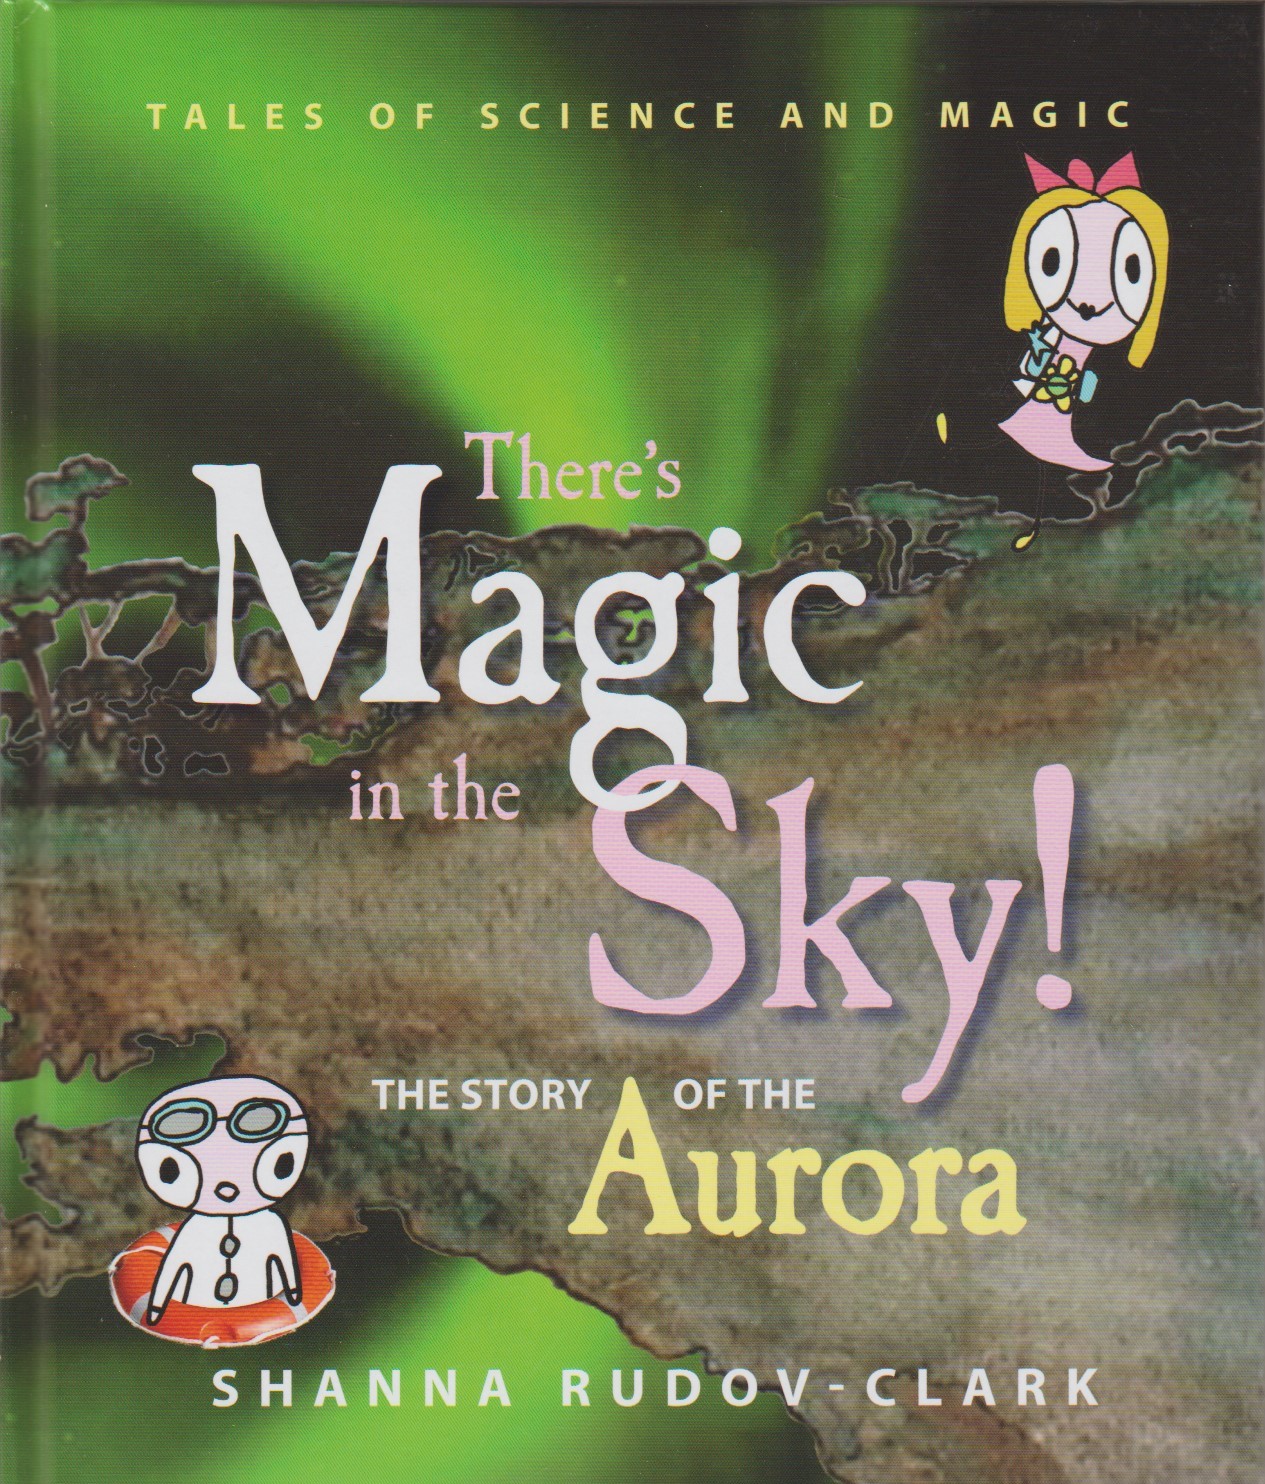 There's Magic in the Sky - the Story of the Aurora for children